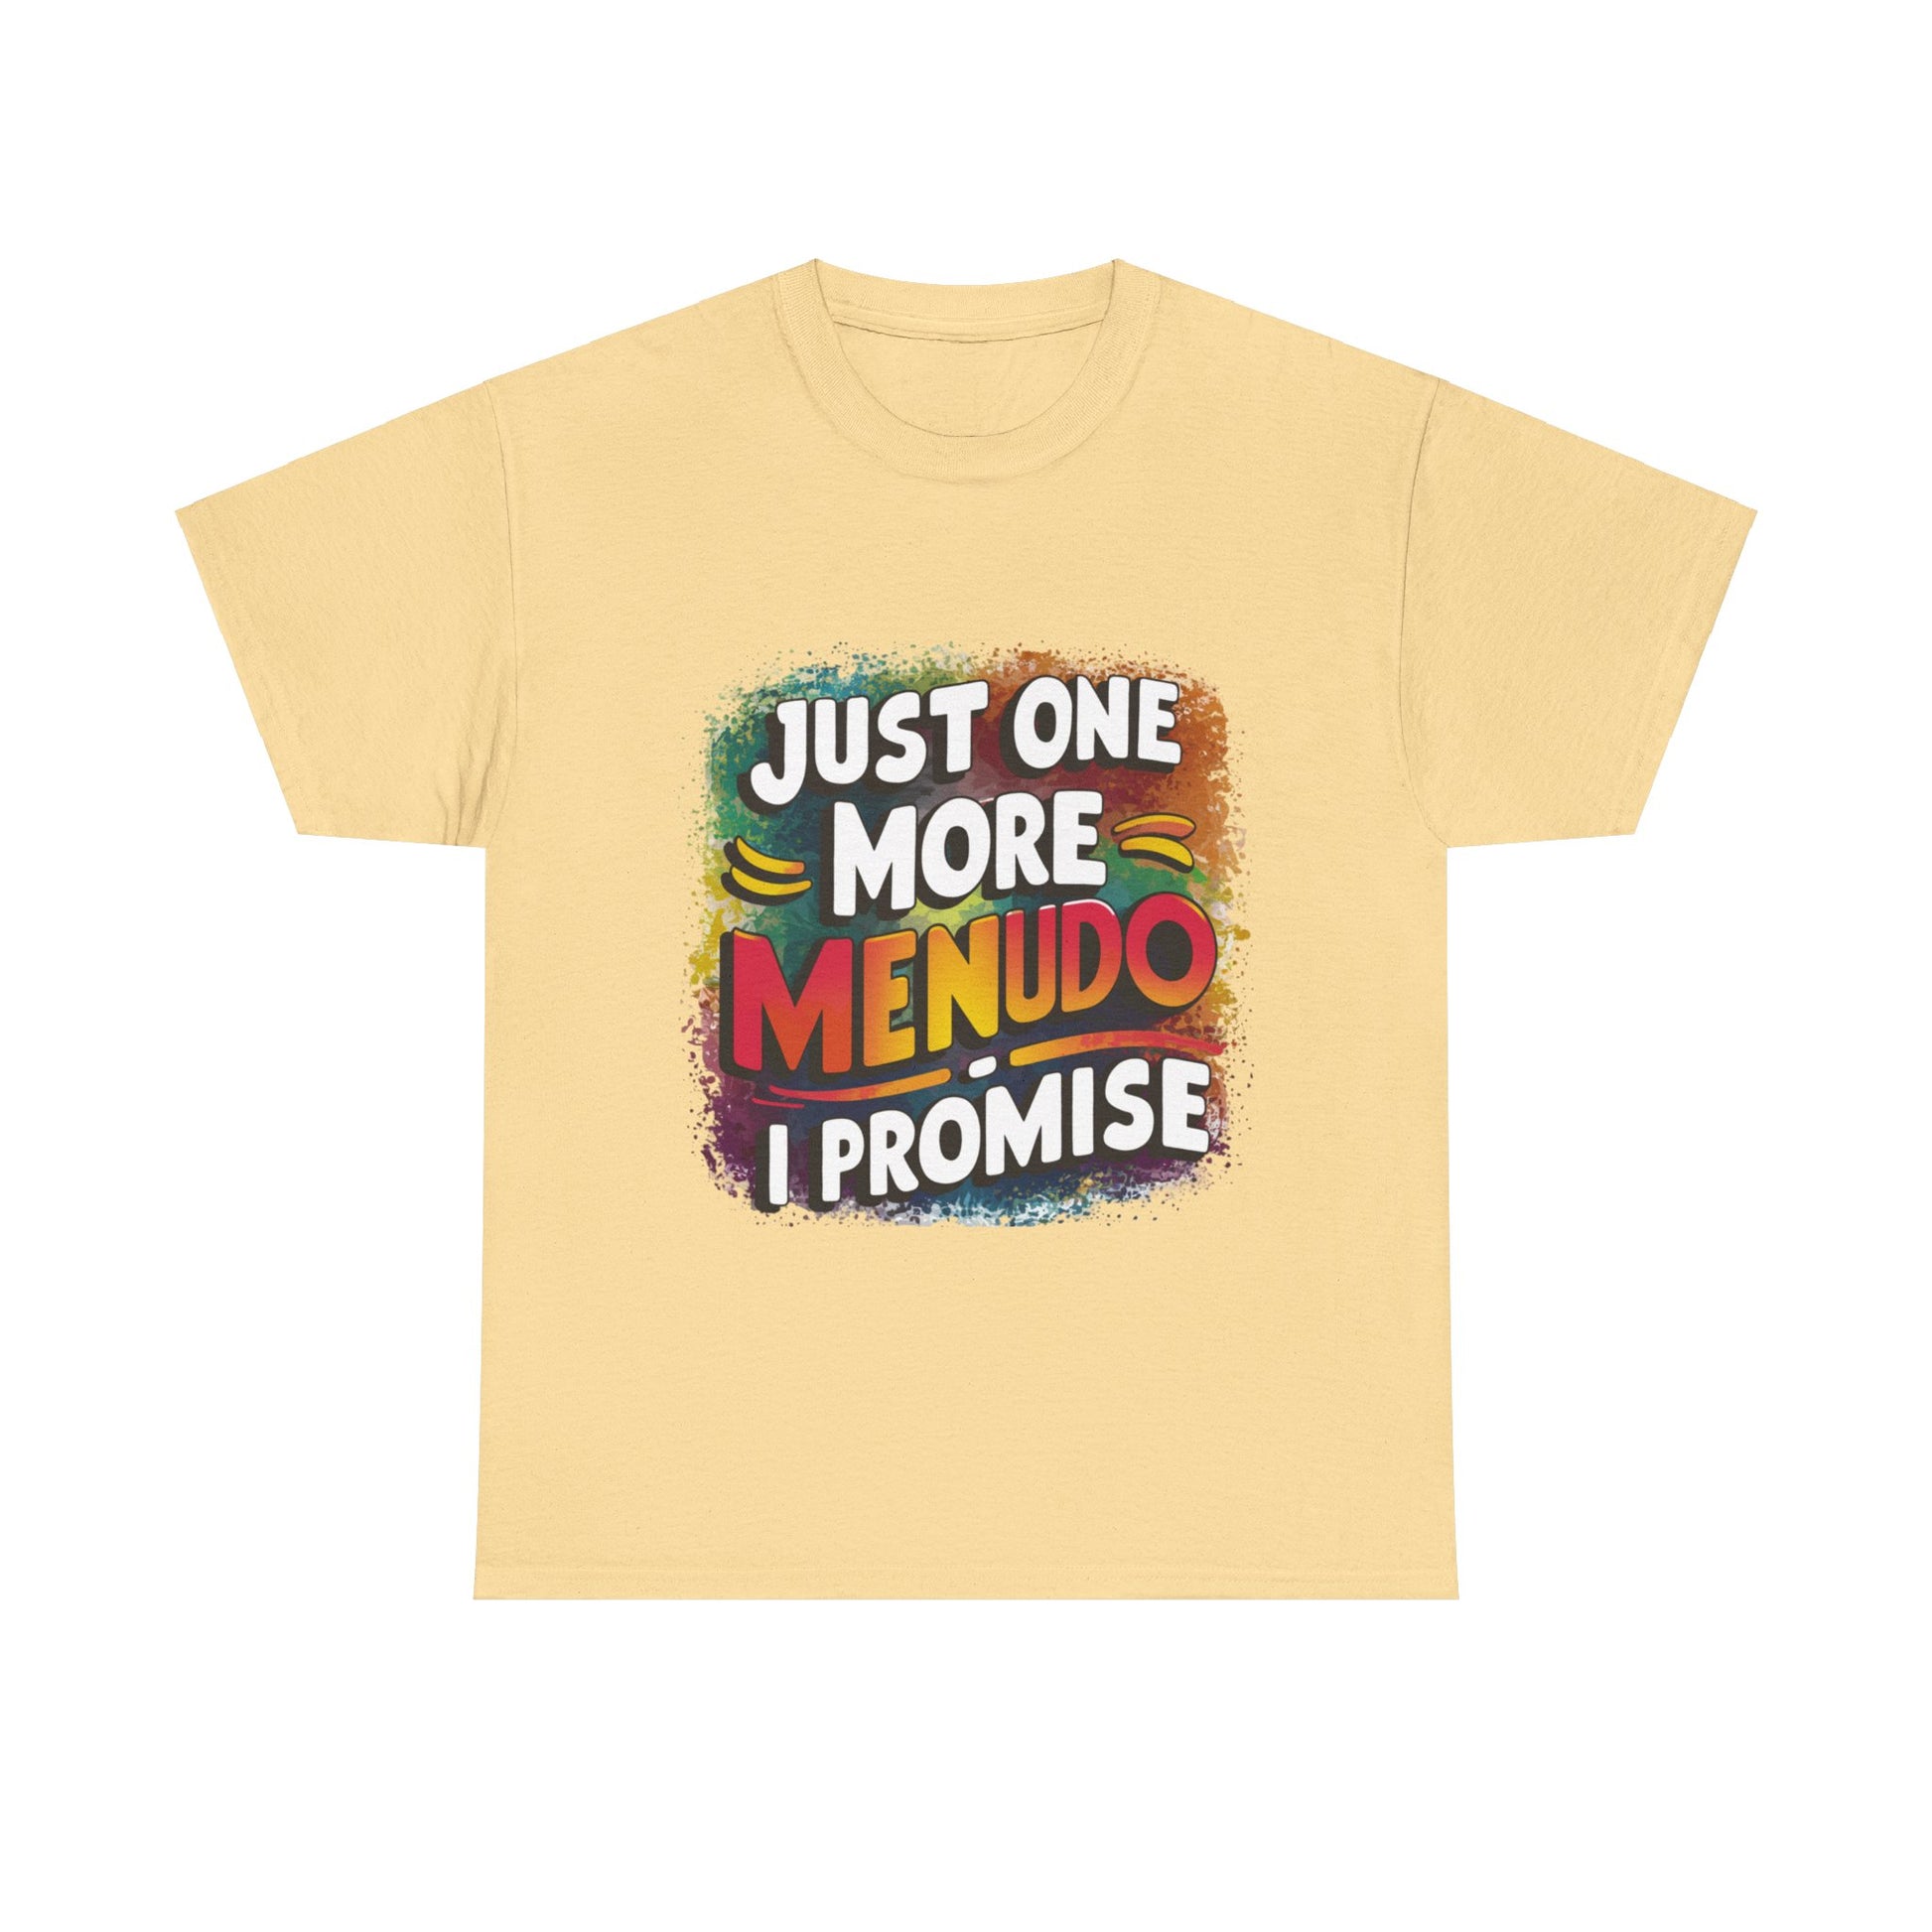 Just One More Menudo I Promise Mexican Food Graphic Unisex Heavy Cotton Tee Cotton Funny Humorous Graphic Soft Premium Unisex Men Women Yellow Haze T-shirt Birthday Gift-11